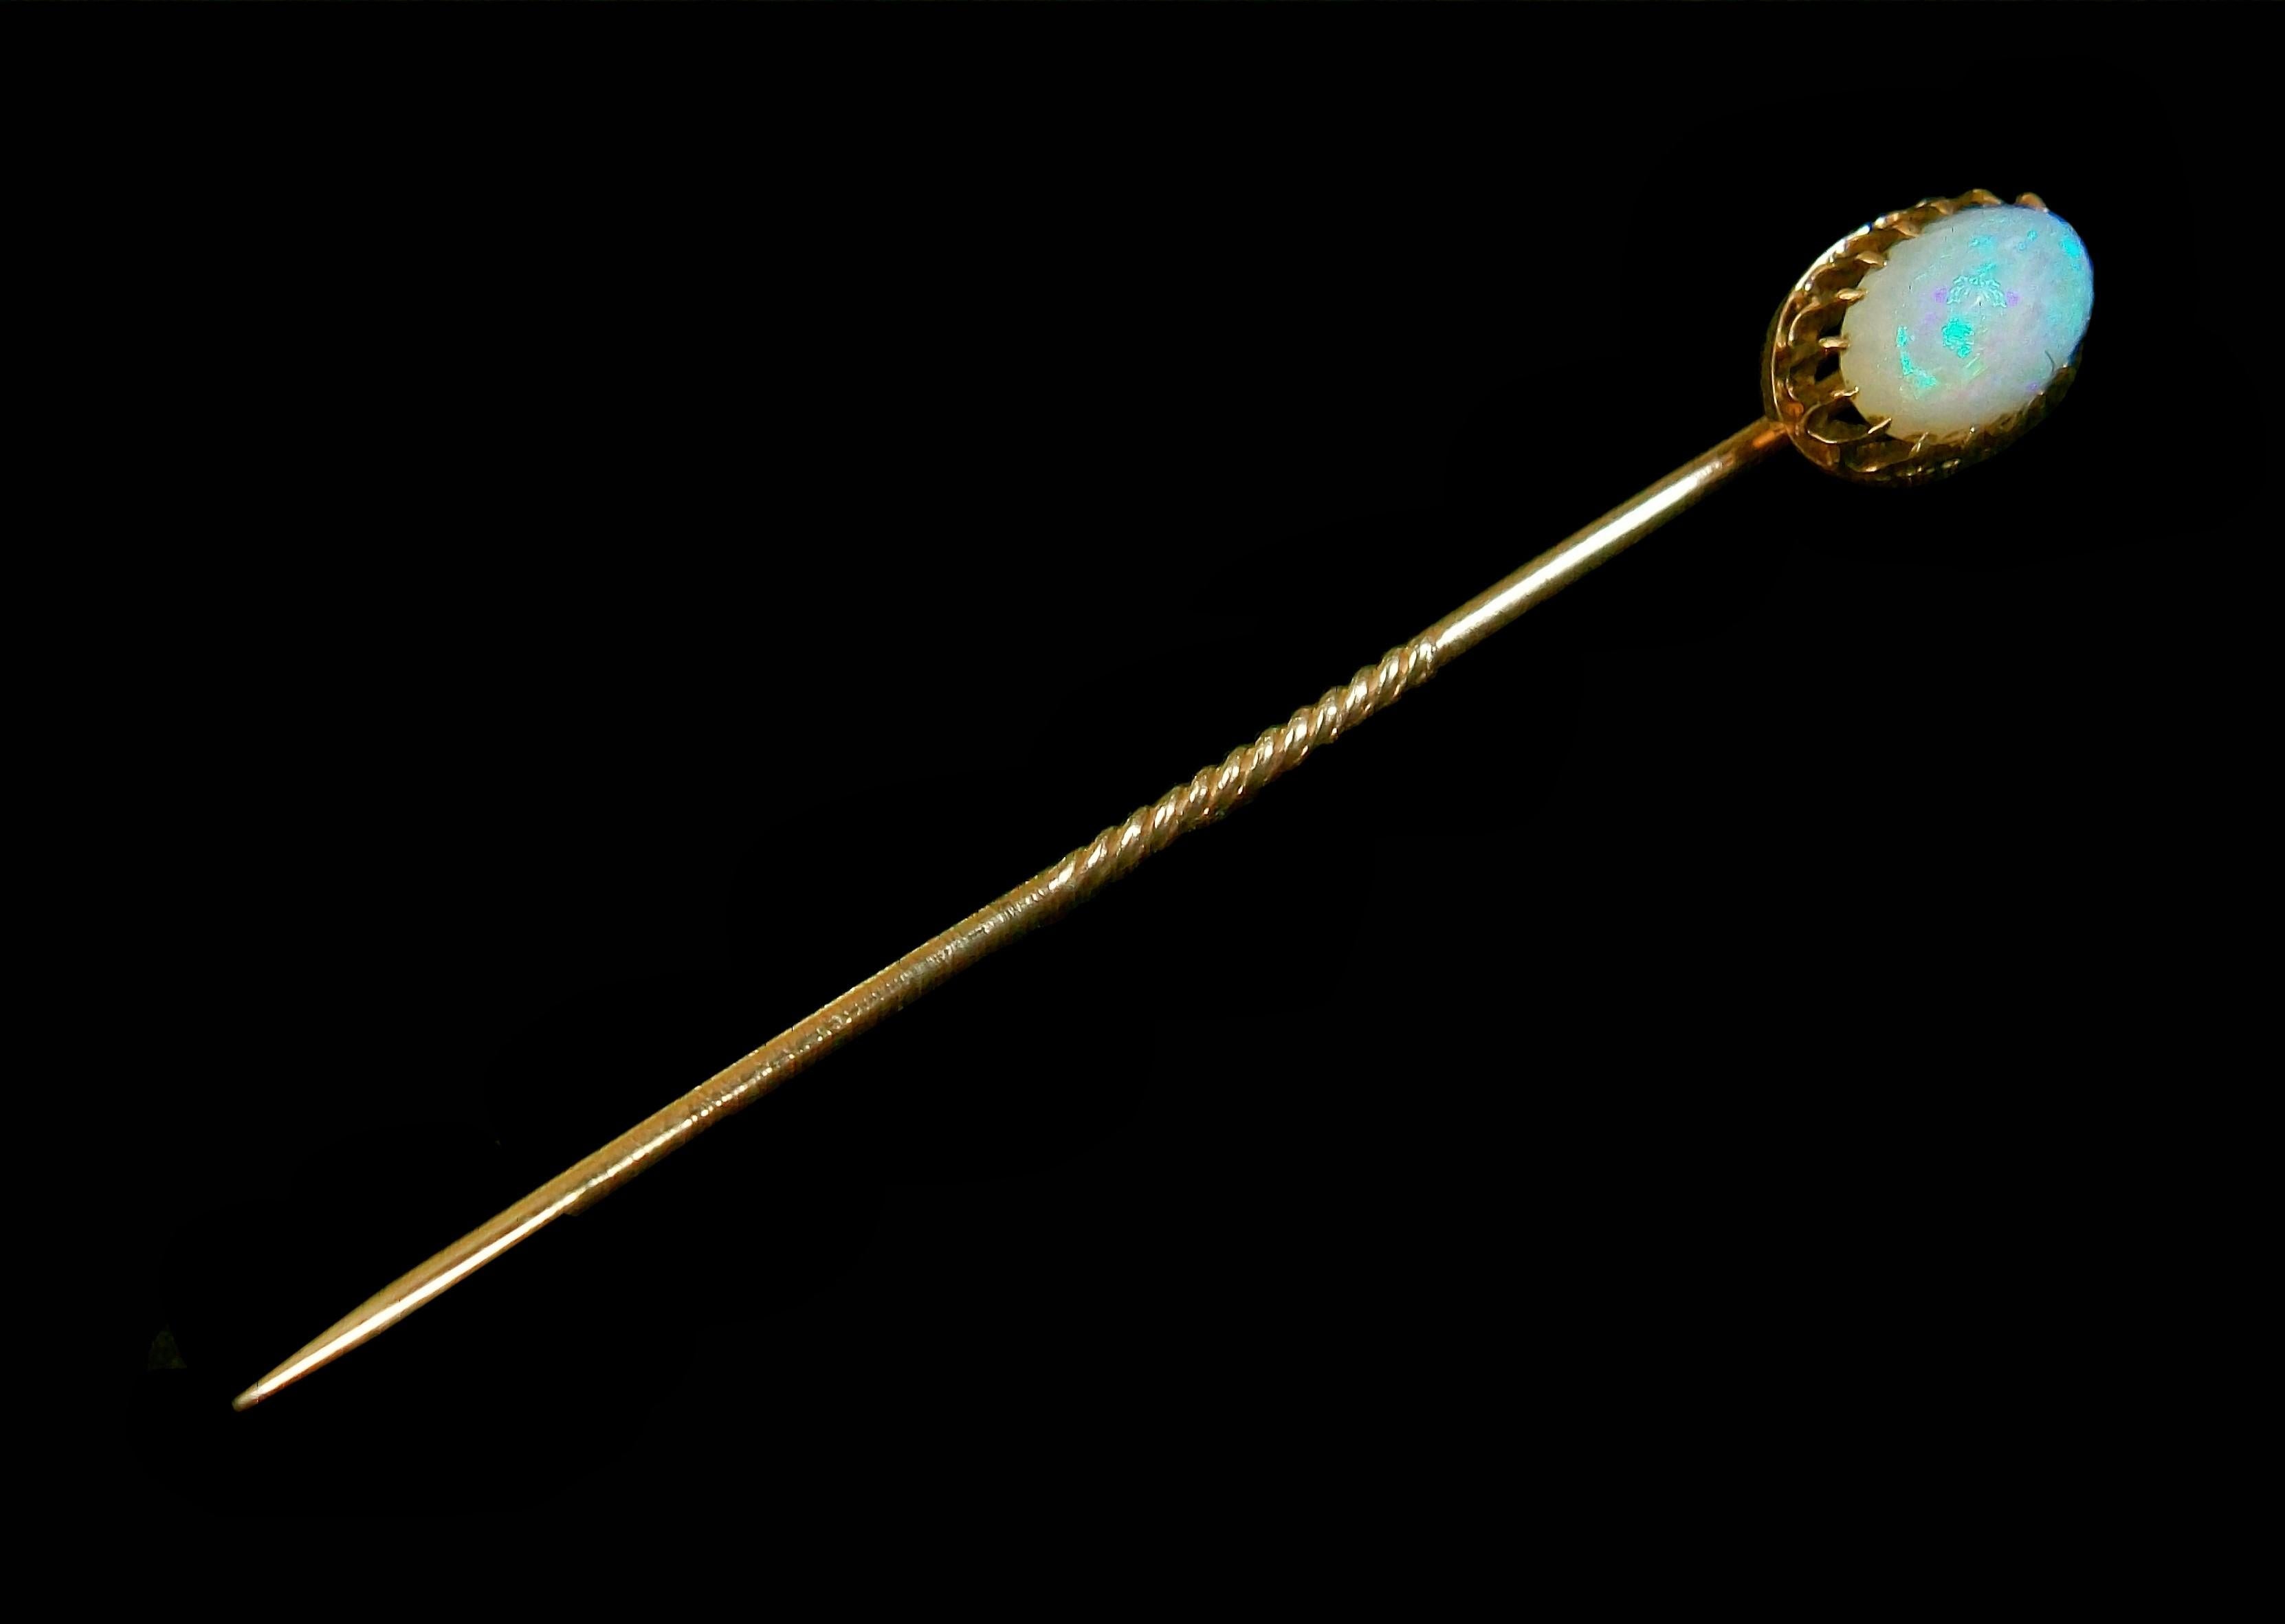 Antique late Victorian 18K yellow gold stick pin - featuring a prong set oval cabochon opal (approximately 8 mm. Long x 6 mm. Wide x 4 mm. Deep = 1.04 carat weight) - twisted central section to the pin - completely hand made - warm aged patina -